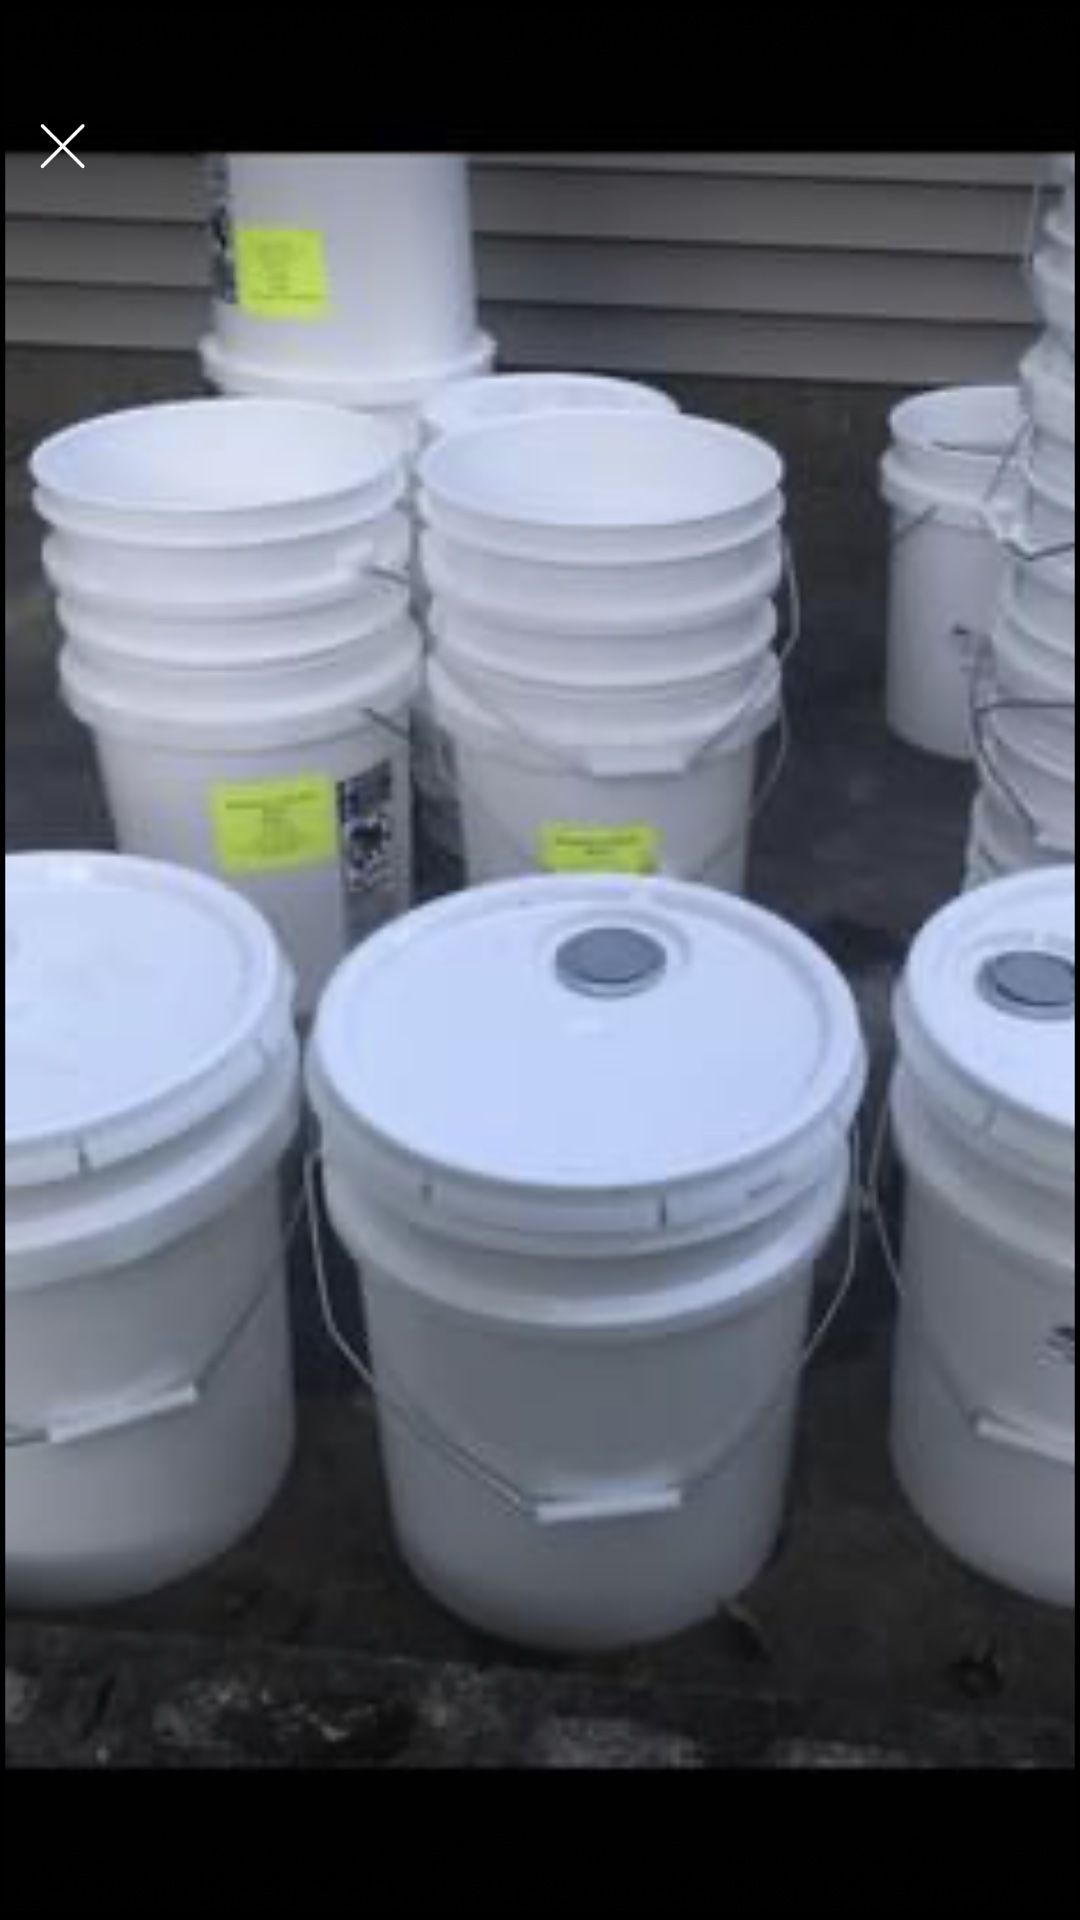 White Plastic 5 Gallon Buckets Food Grade Like New $3 With Cover $2 Without Covers